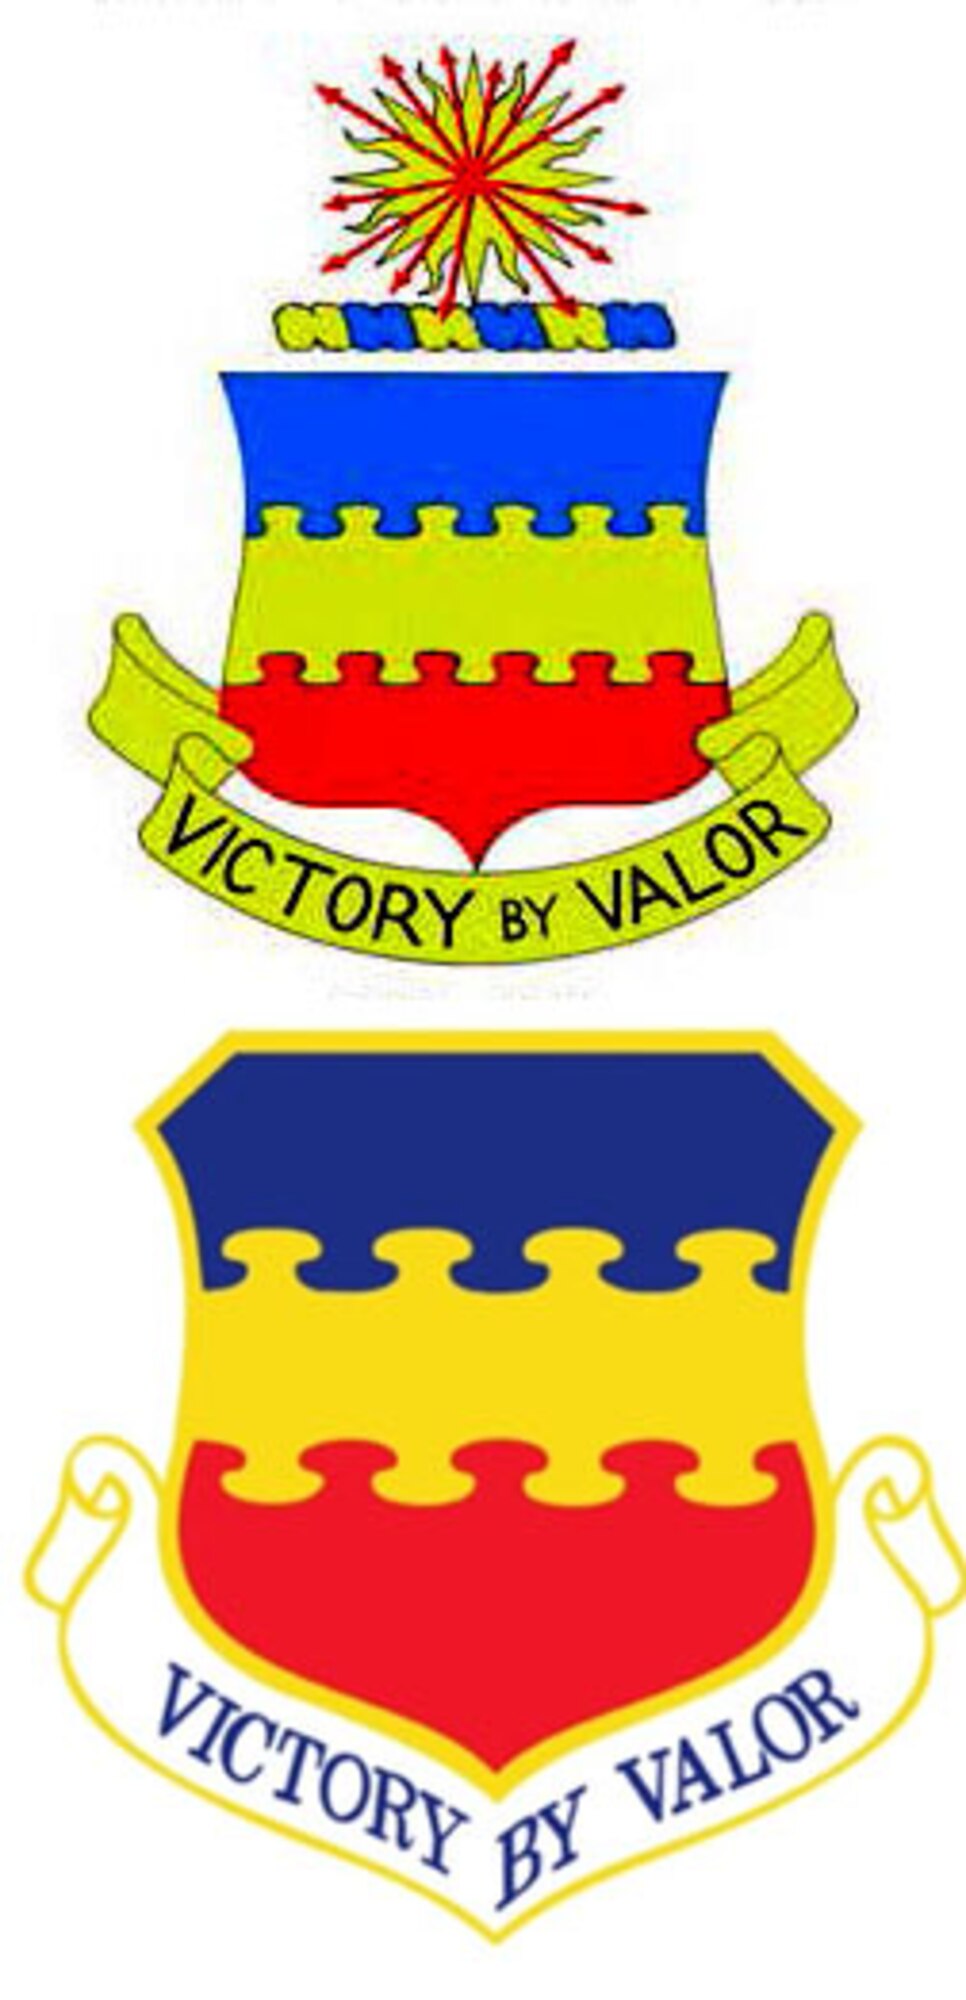 The 20th Pursuit Group, Fighter Group and Fighter-Bomber Group insignia from 1934-1955, top, and the 20th Fighter Wing insignia from 1991 to present. The blue portion of the crest represents the sky, the primary theatre of Air Force operations, the yellow portion represents the sun and excellence of Air Force members, and the red portion represents courage and valor highlighting the wing’s motto, “Victory by Valor,” displayed below the shields. (Courtesy graphic)